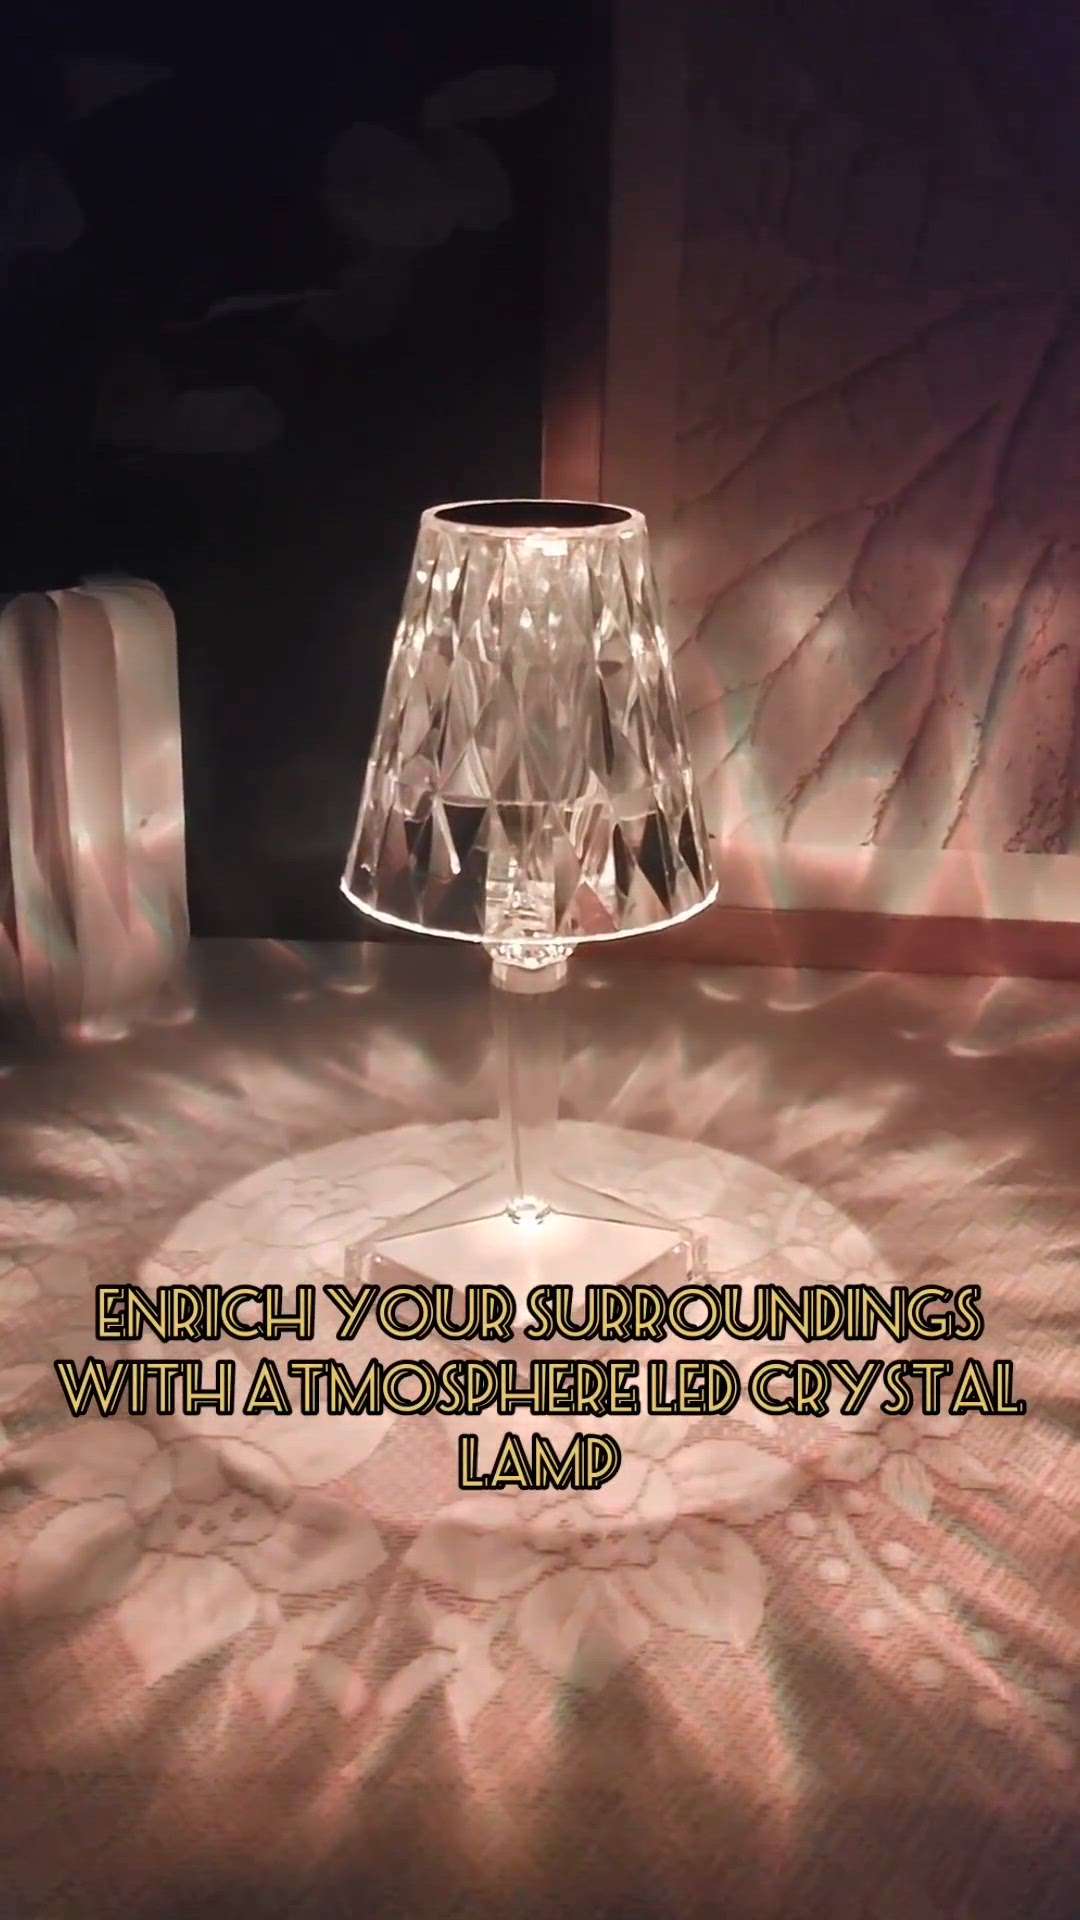 With its captivating design,the Atmosphere LED crystal lamp adds a touch of elegance and sophistication to any space,be it a living room, bedroom, or even a dining area.

#art #theartment #lamp #decro #tablelamp #light #decorshopping